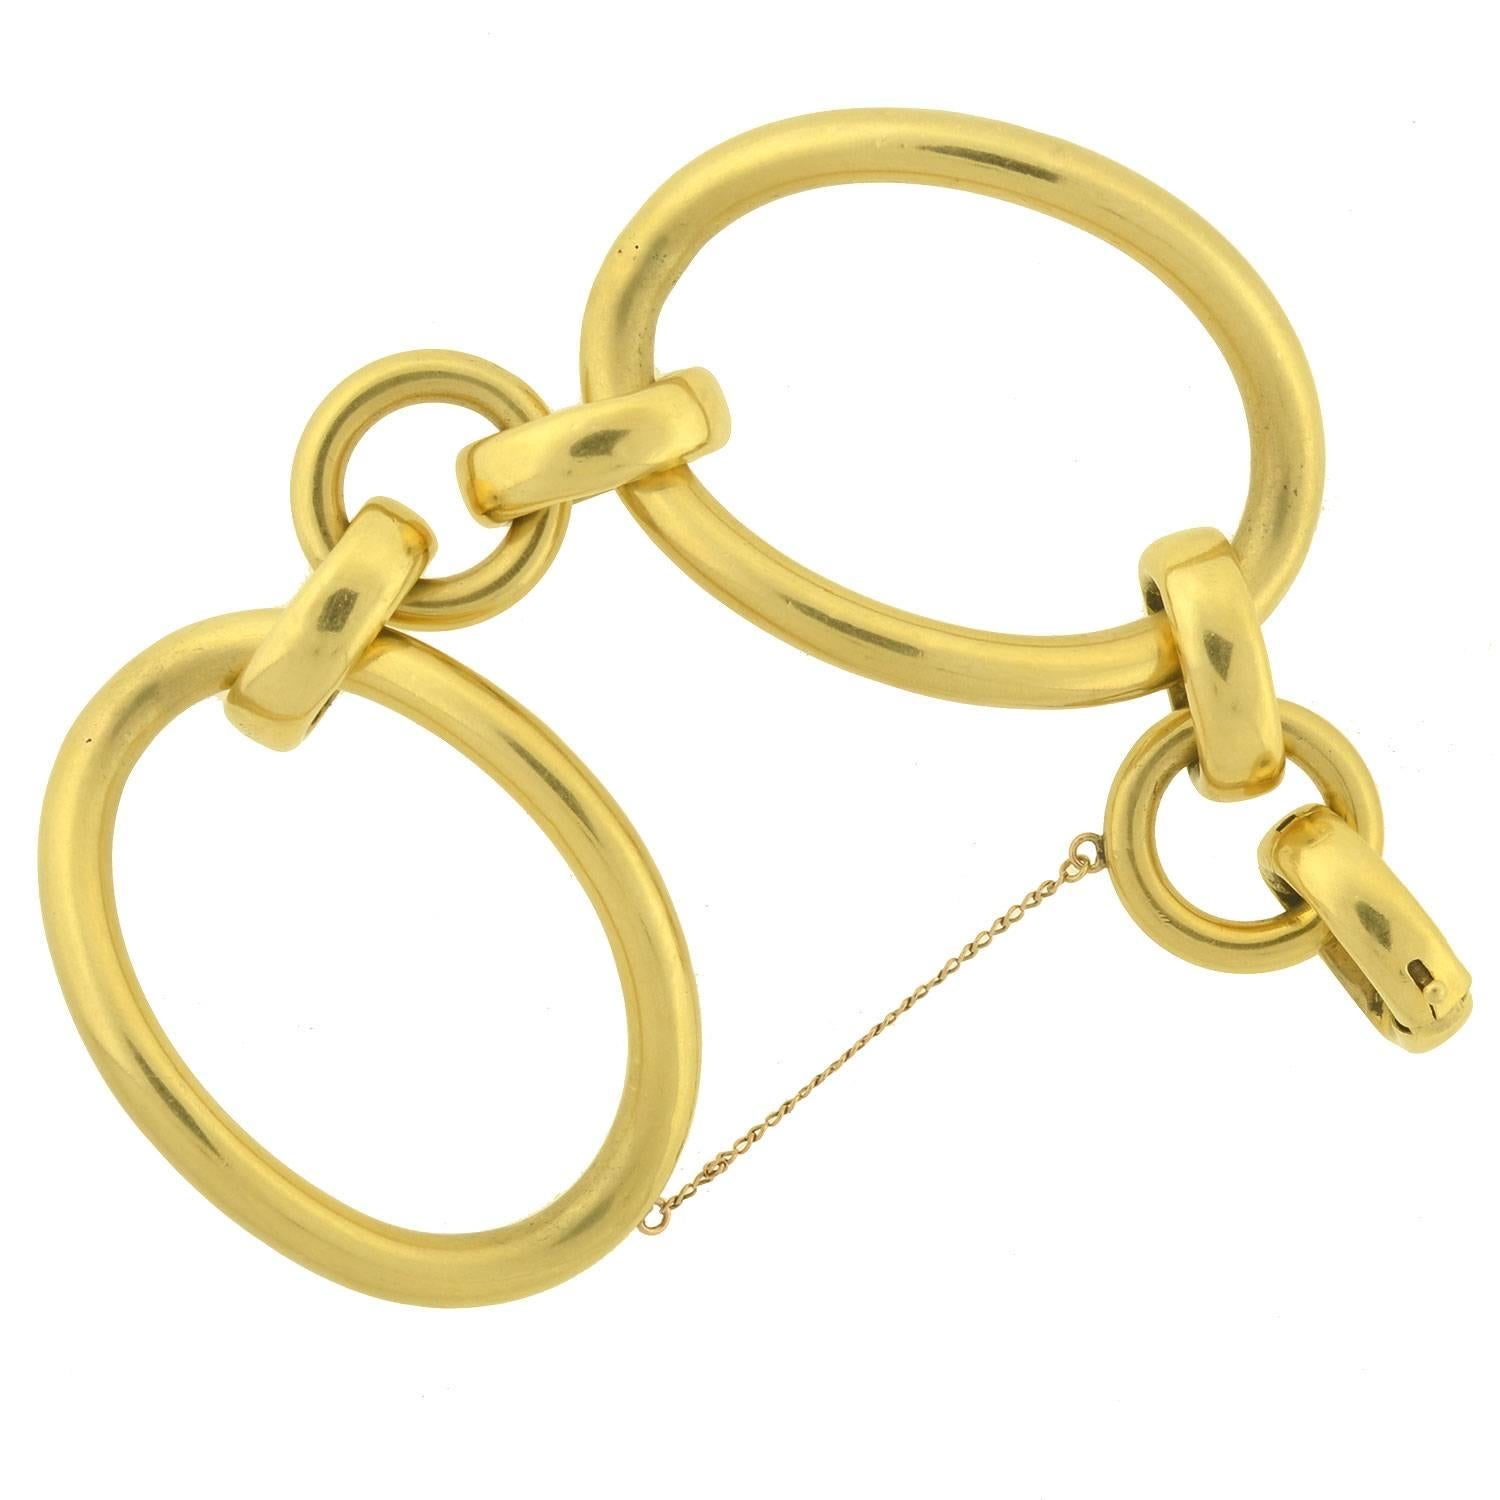 This fabulous vintage bracelet from the 1970s makes a very big statement! Italian in origin, this stylish piece is comprised of oversized 18kt gold links and chunky connector rings. When worn, the bracelet has a very substantial look and feel,